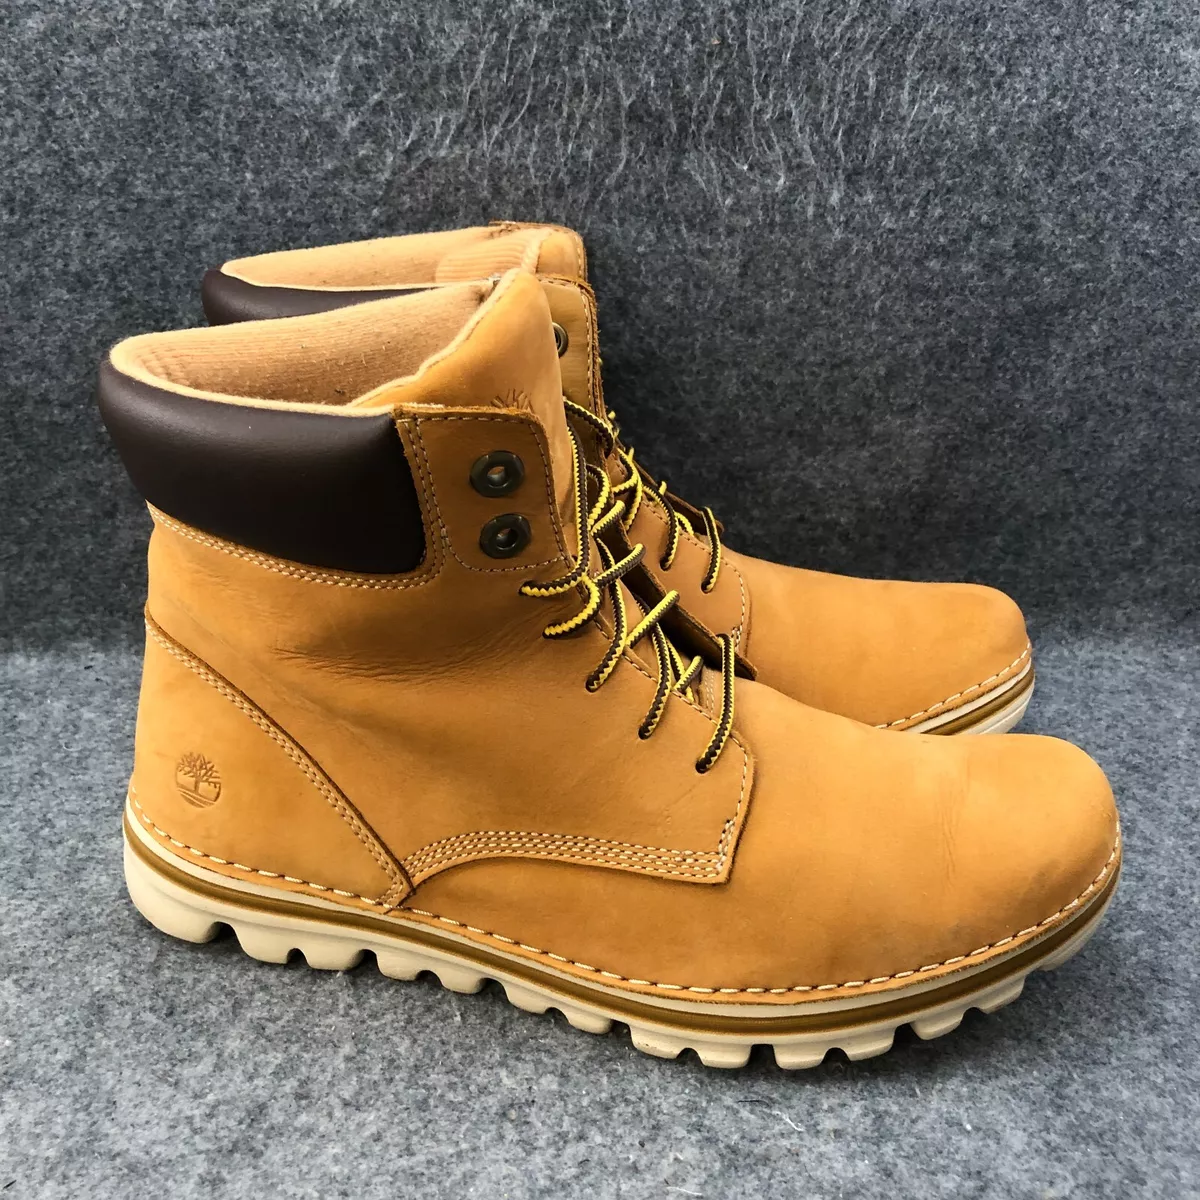 Timberland Boots Brookton Leather Shoes EU39.5 | eBay